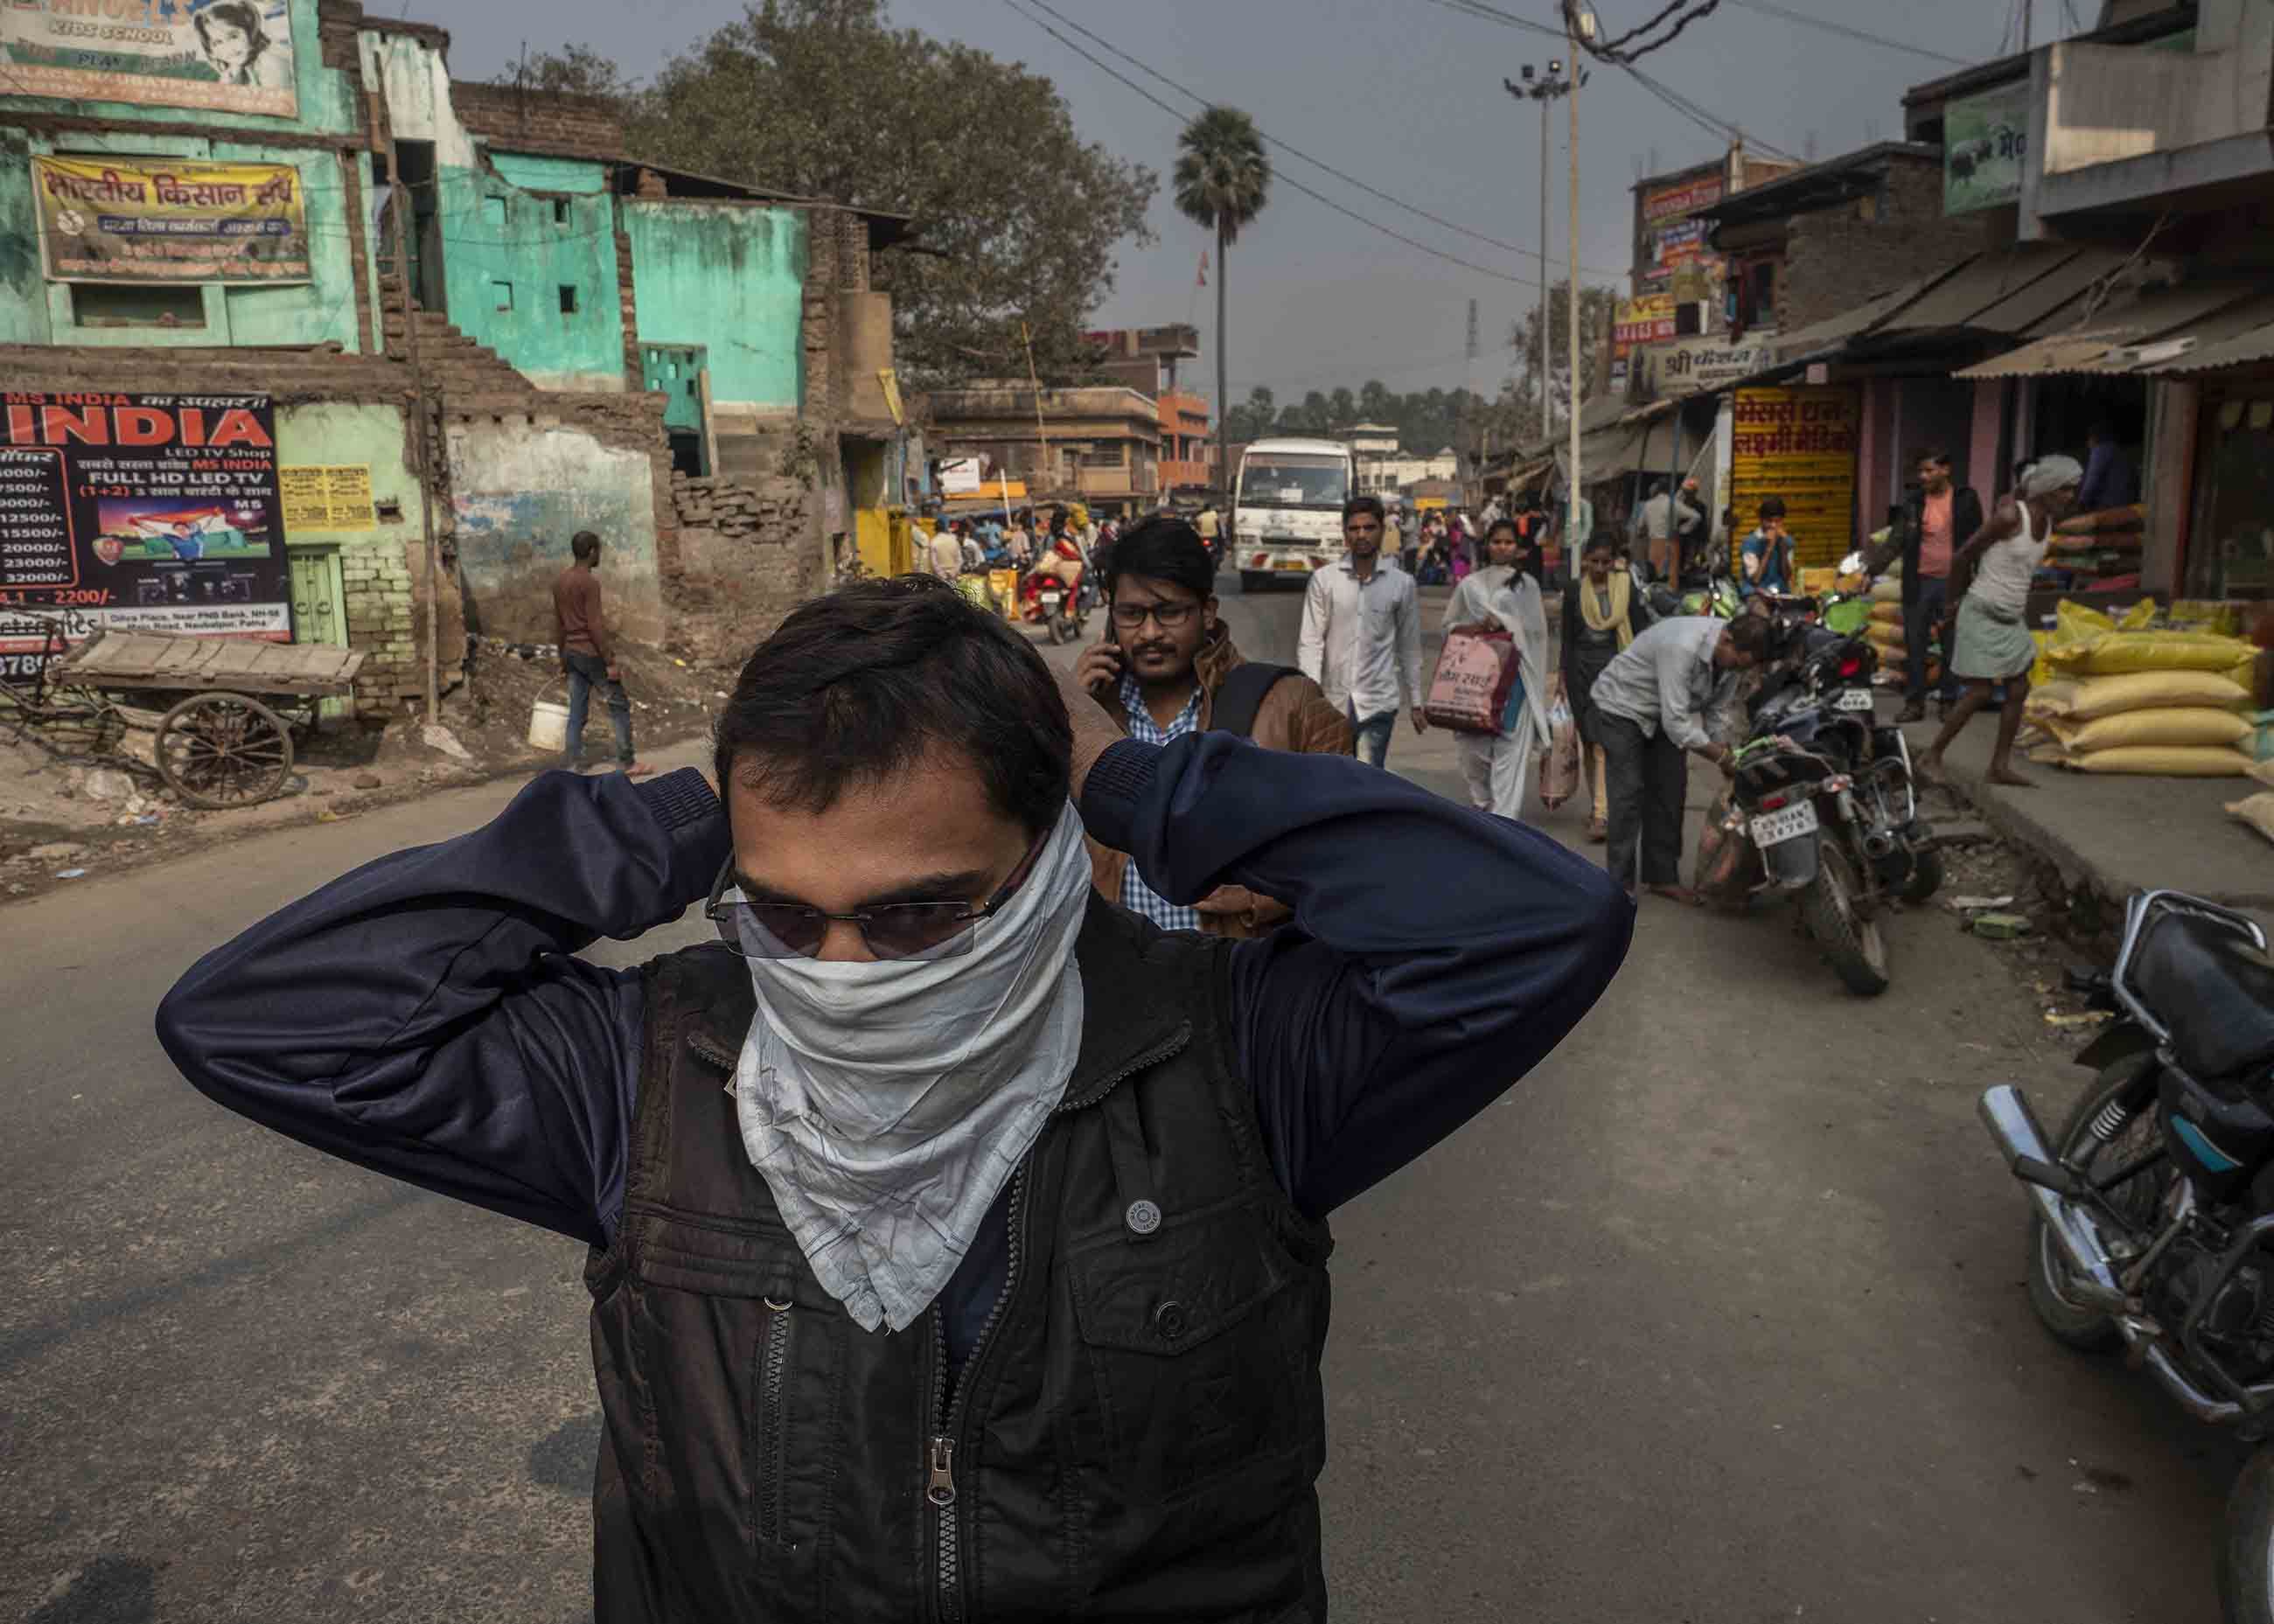 The open burning of trash  adds to the daily cloud. Here, a man ties a scarf over his face after encountering a smoldering pile of trash. Image by Larry C. Price. India, 2018.